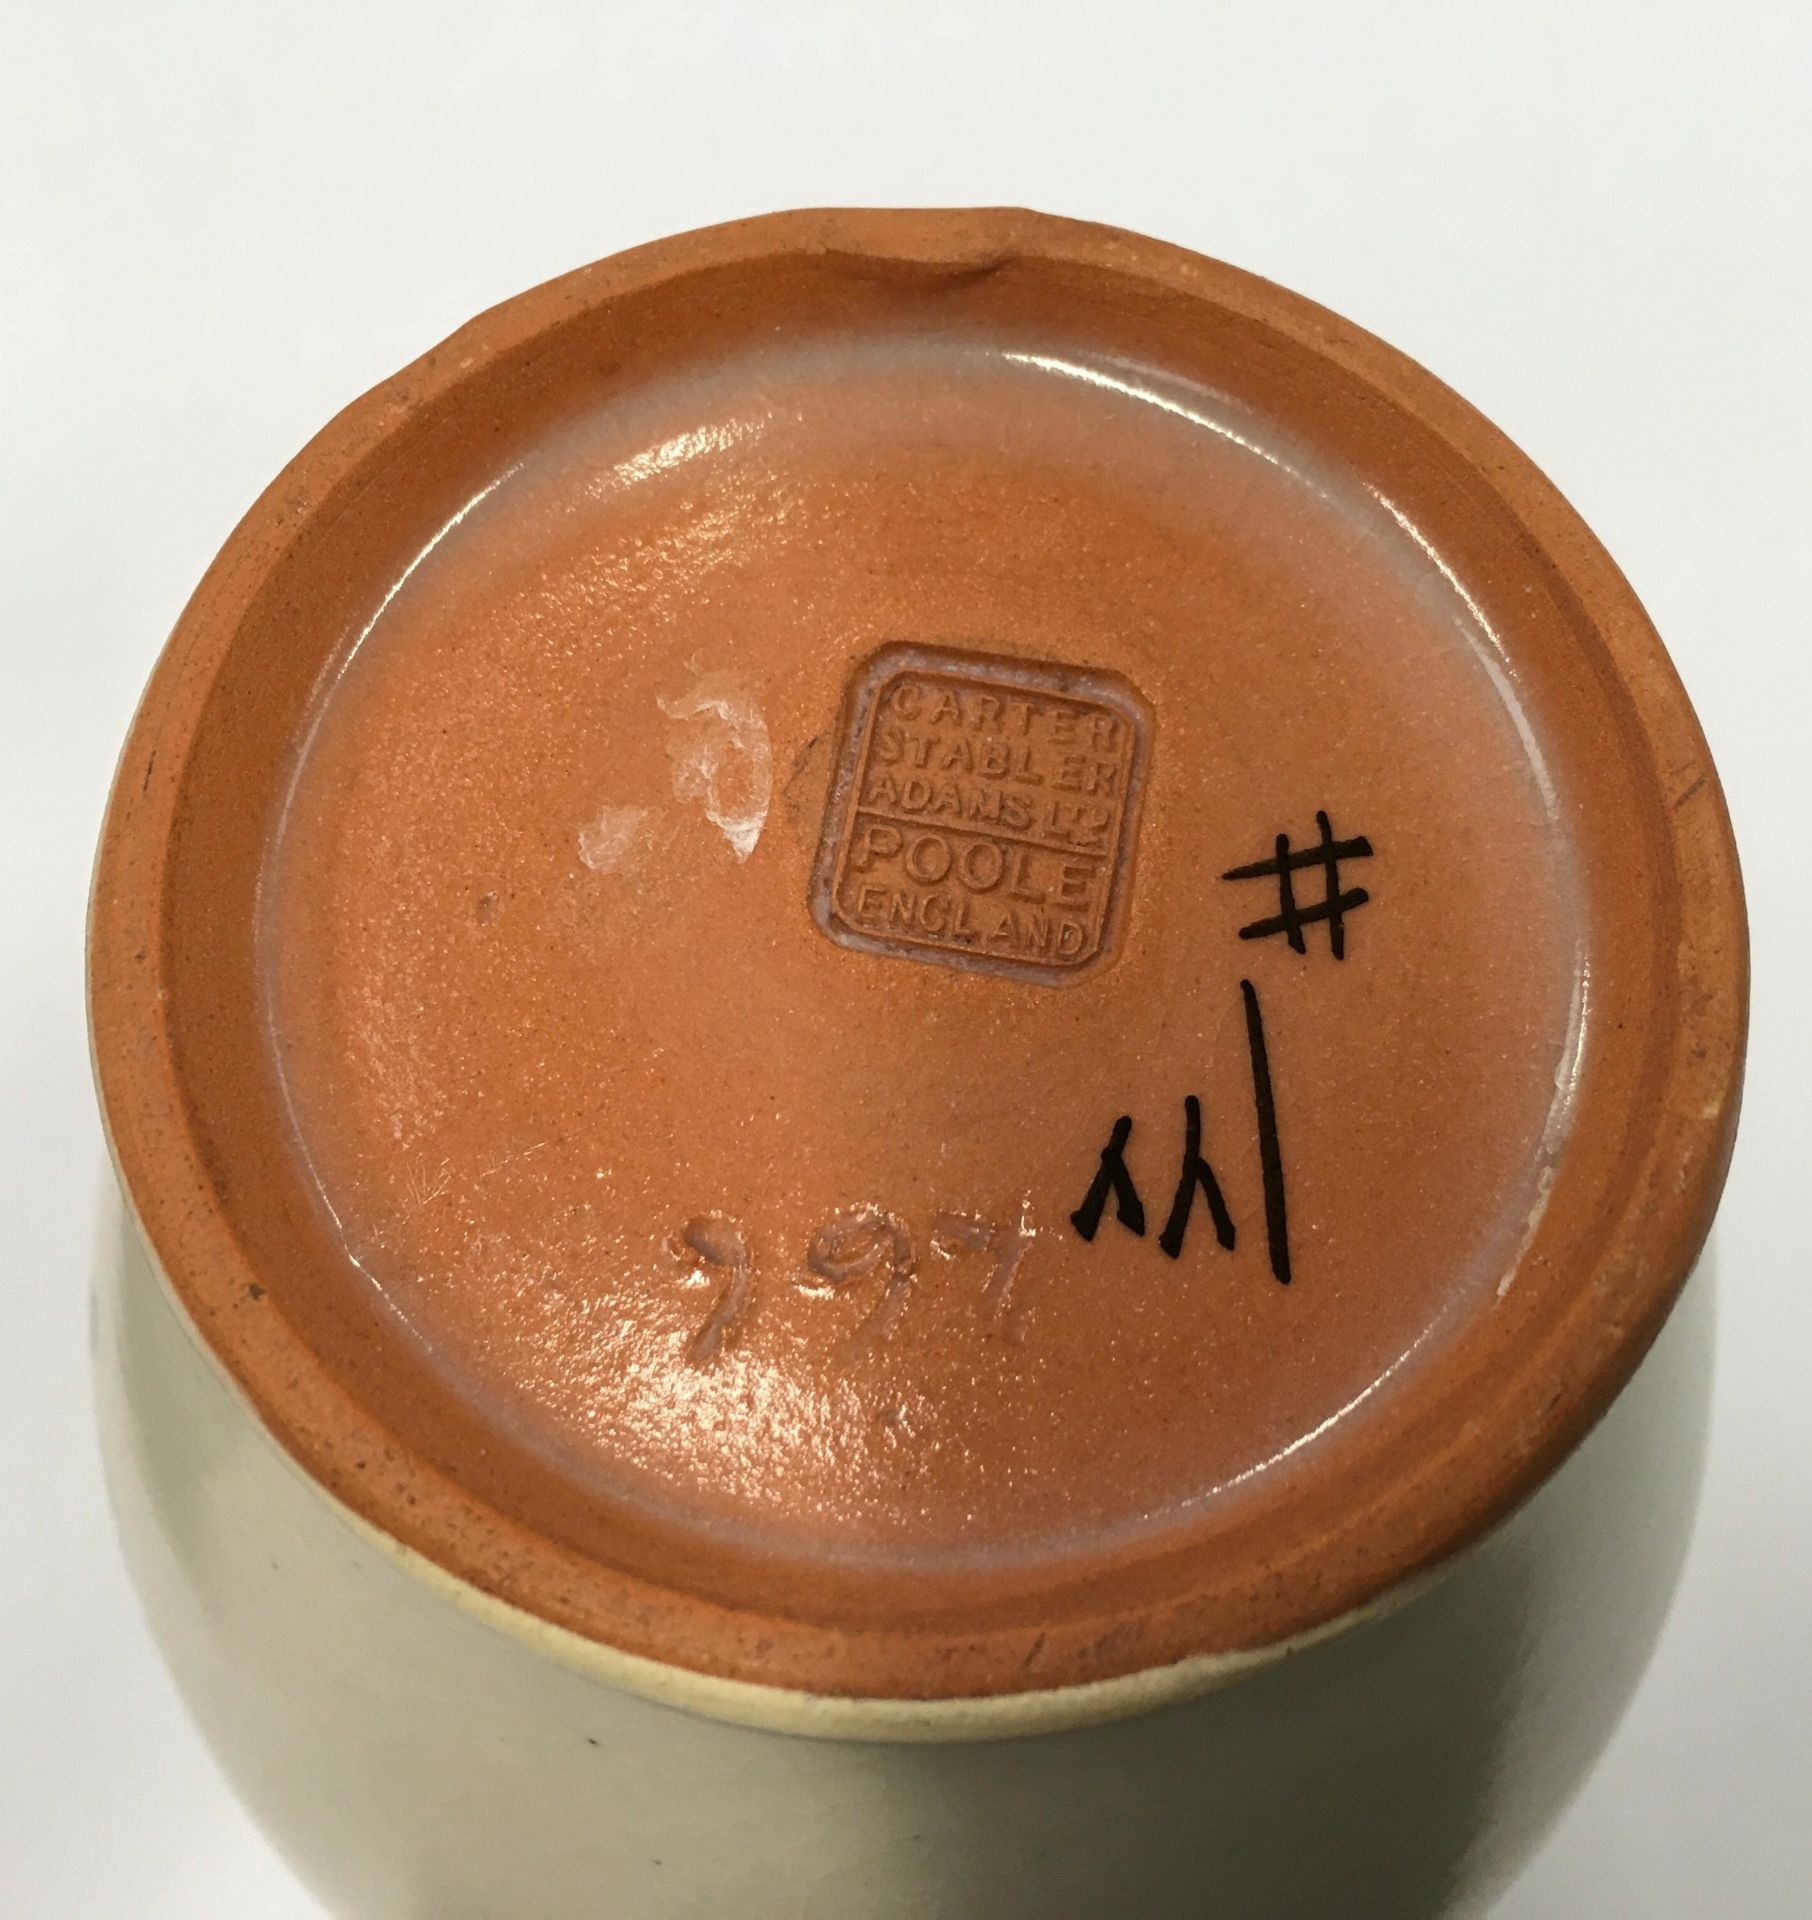 Poole Pottery Carter Stabler Adams shape 466 YY pattern vase decorated by Nellie Bishton (Blackmore) - Image 3 of 3